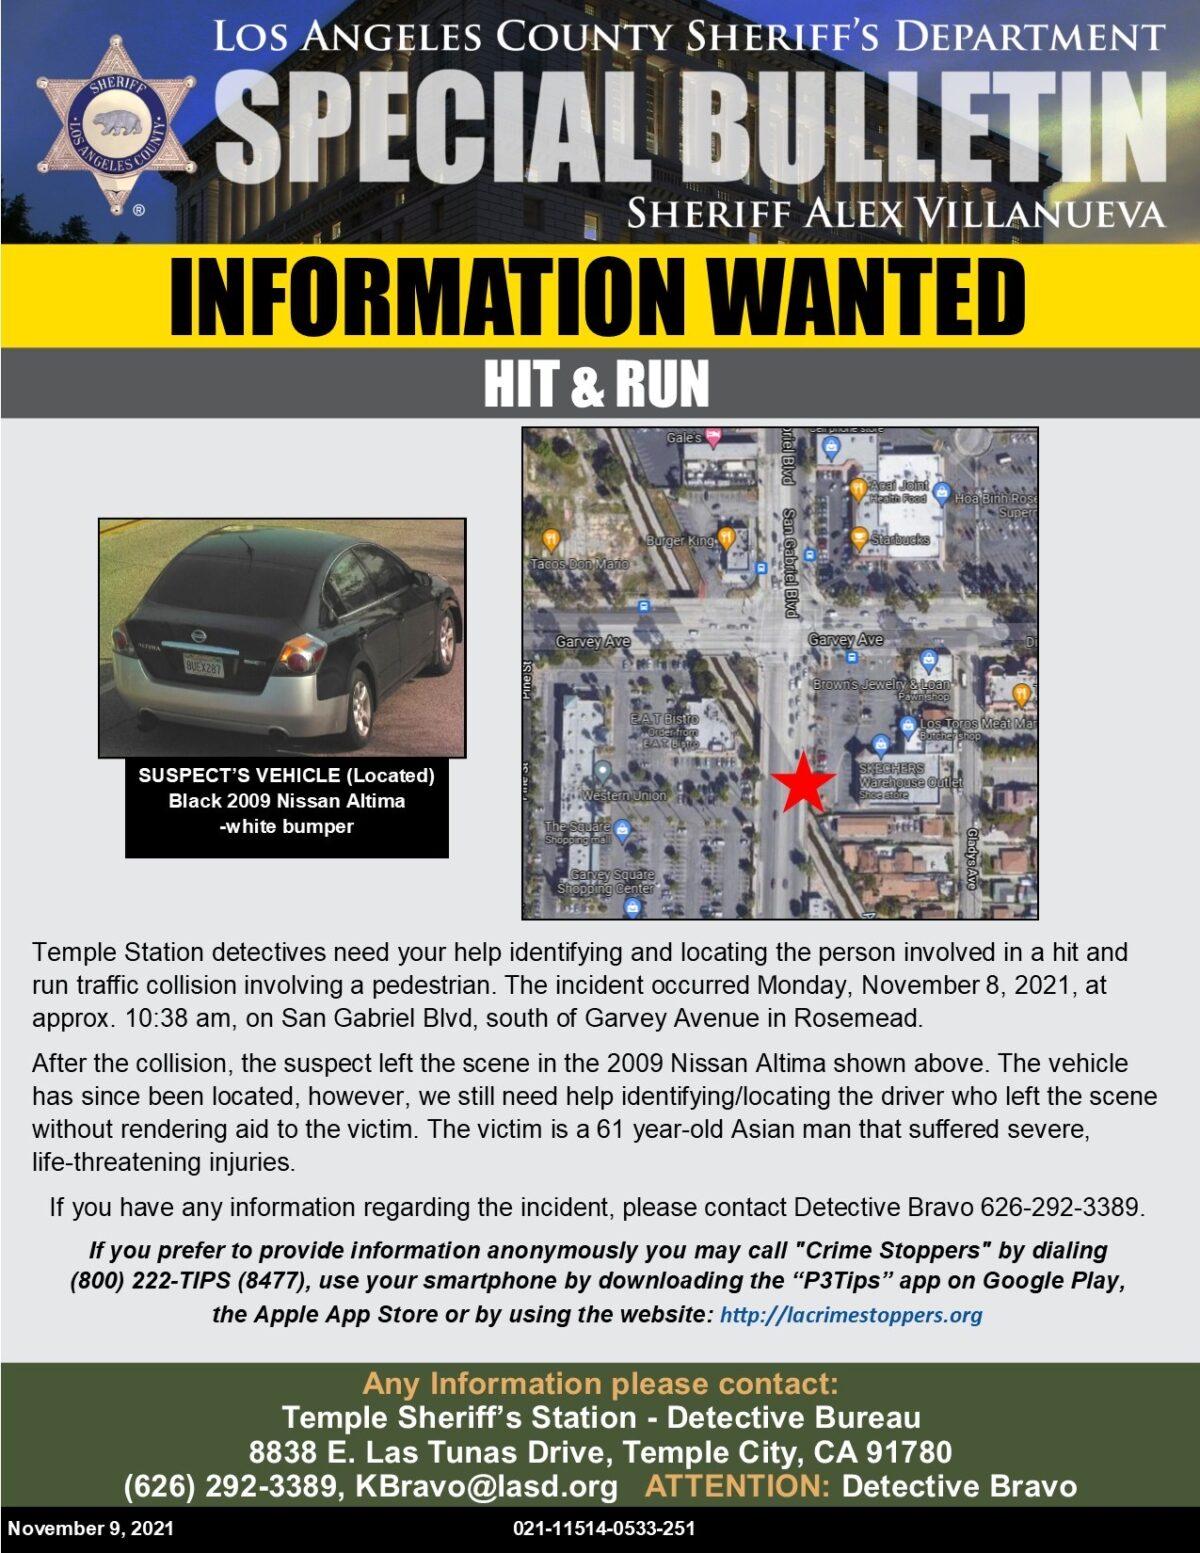 (Courtesy Los Angeles County Sheriff's Department)